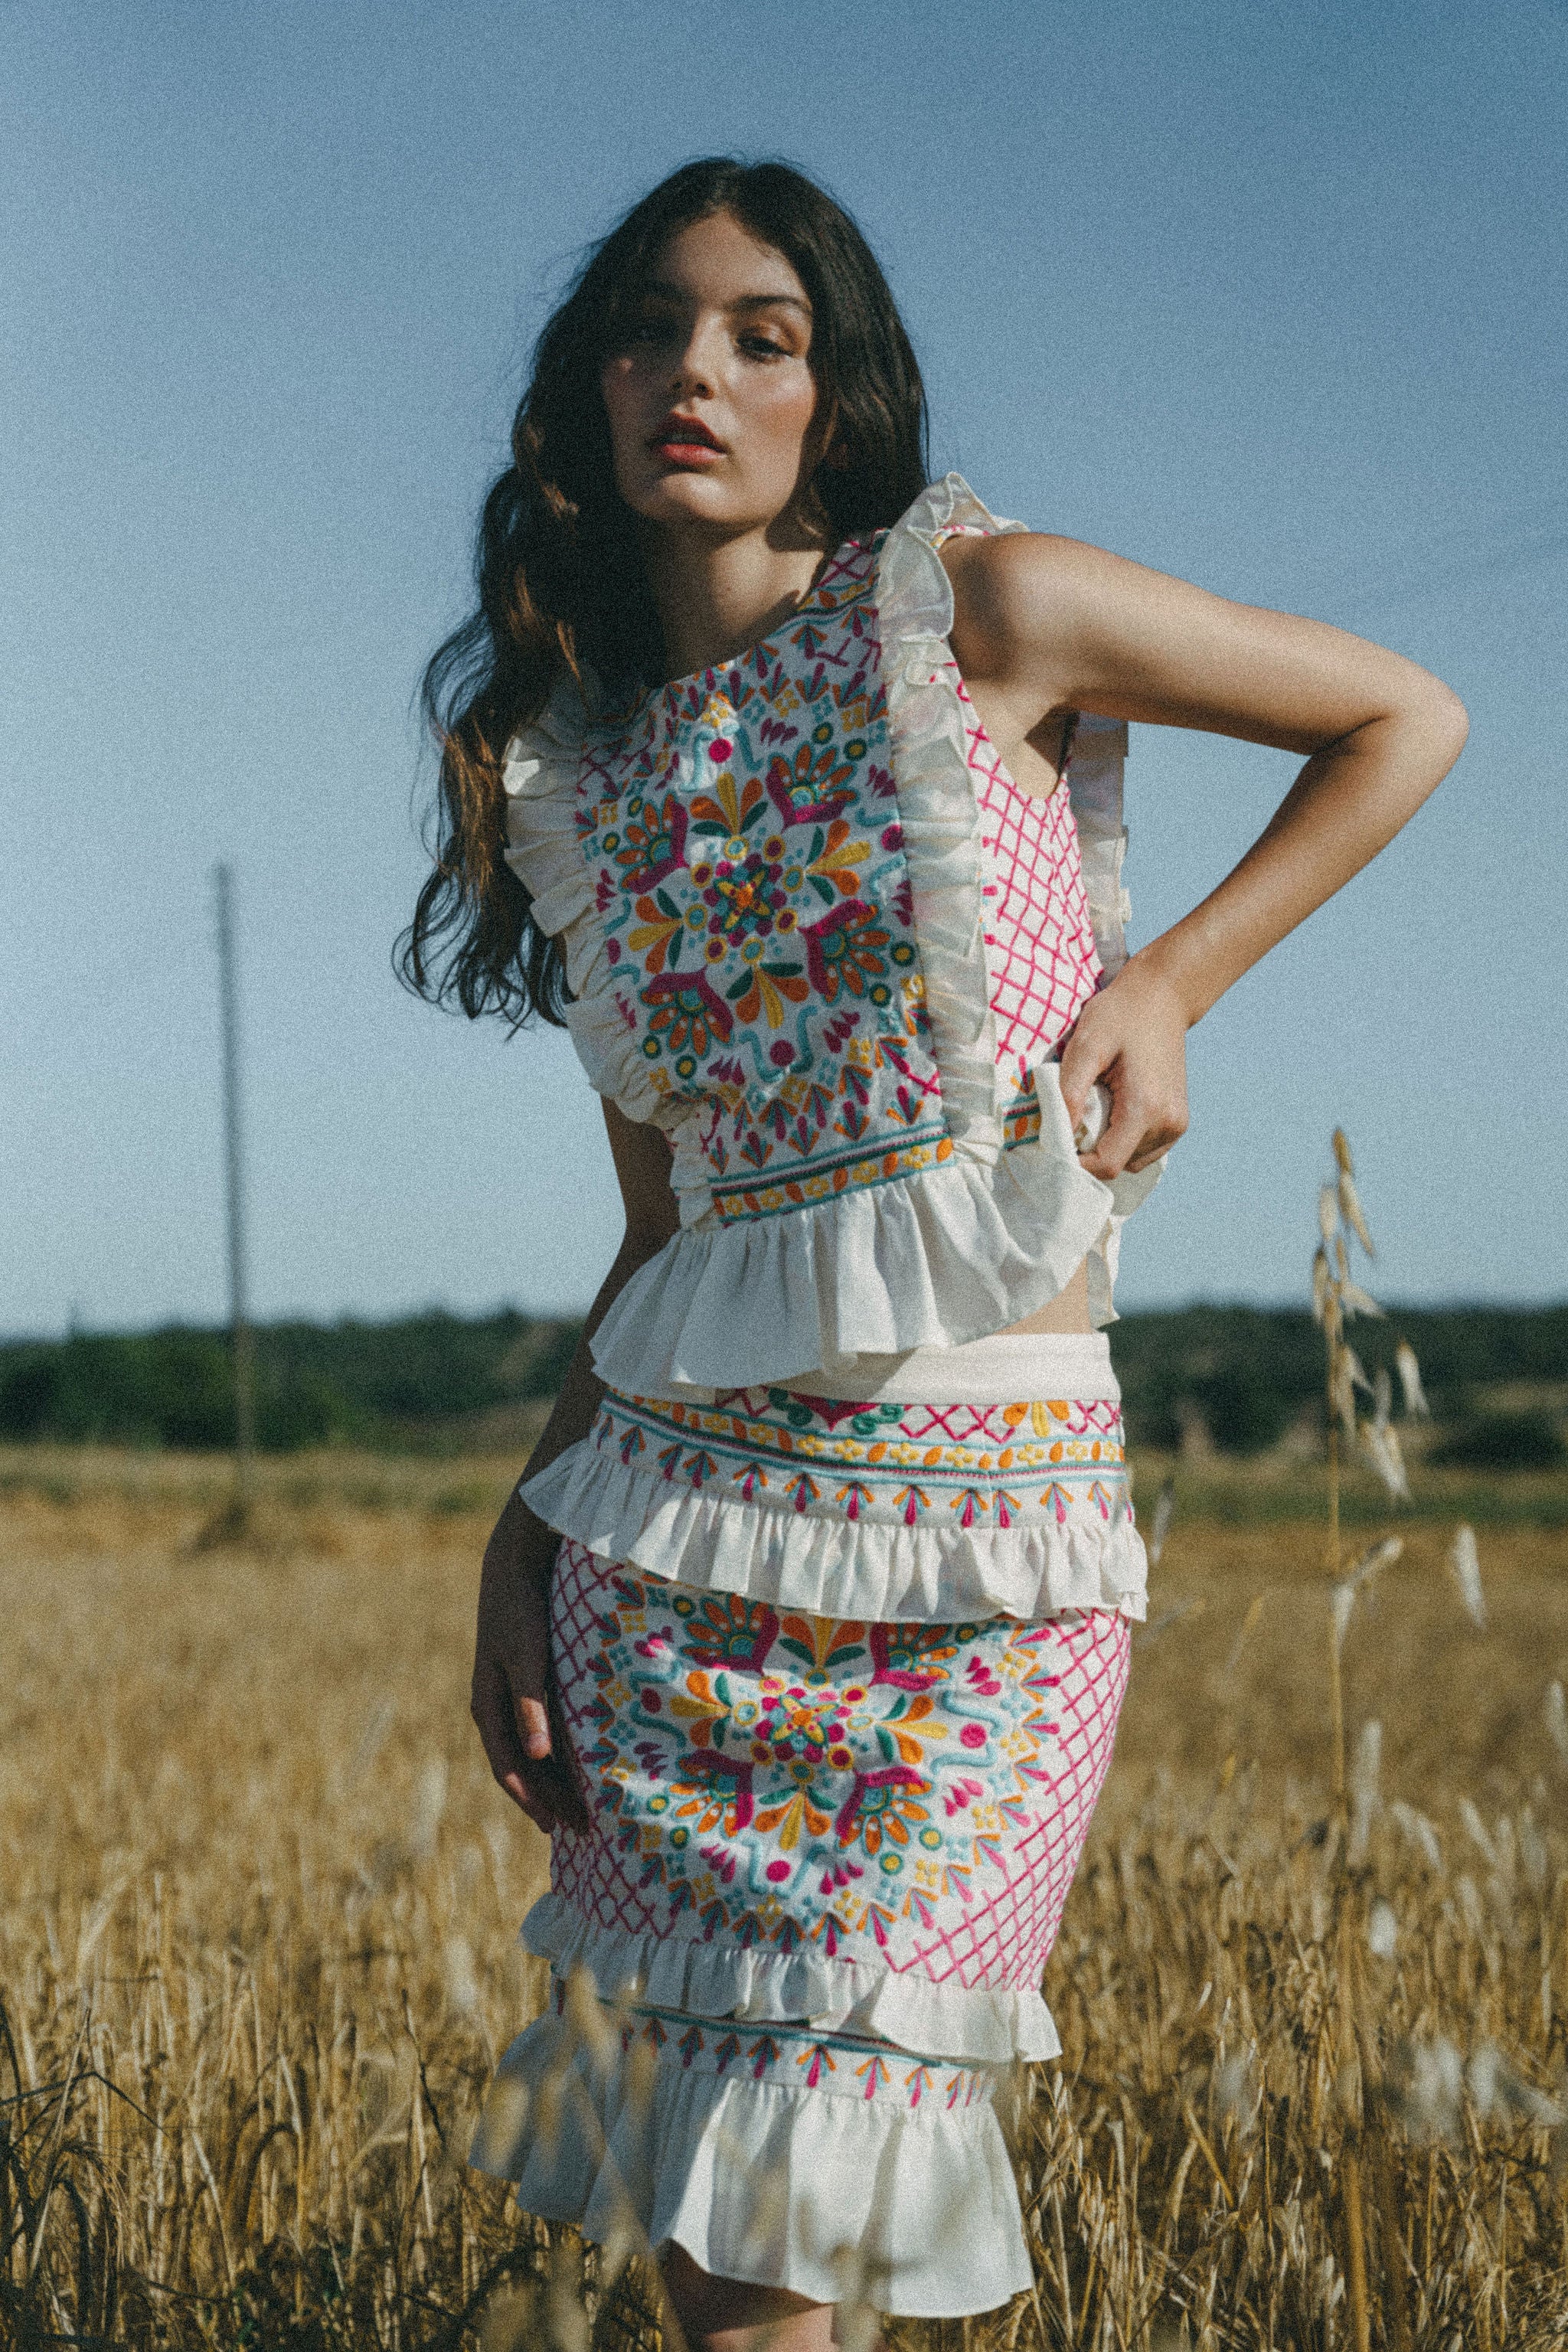 girl in field wearing colourful embroidered top and skirt with frills